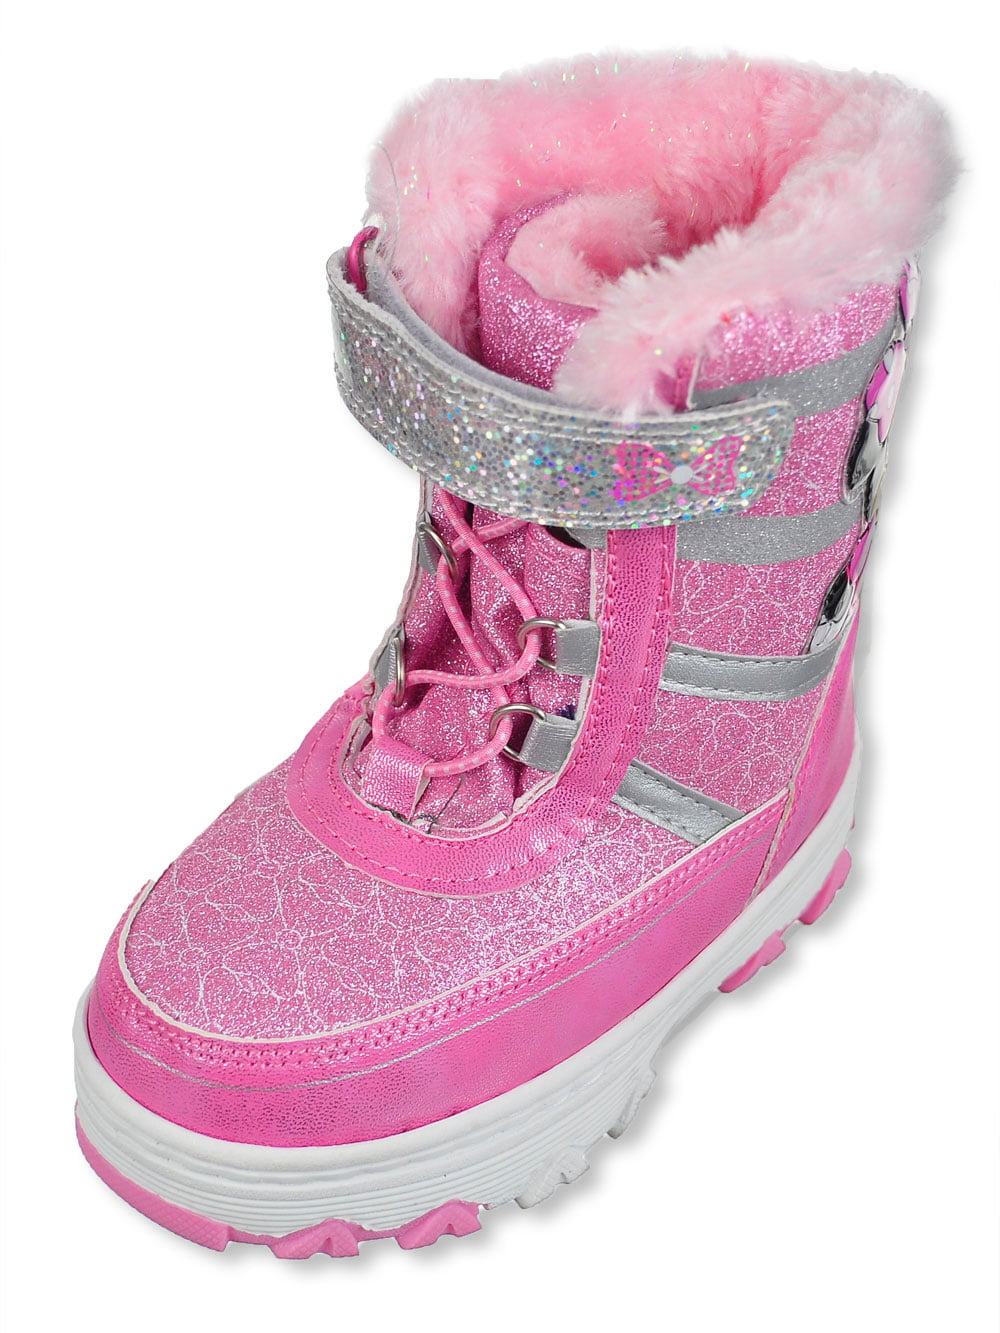 Disney Minnie Mouse Toddler Winter Snow Boots 10T 